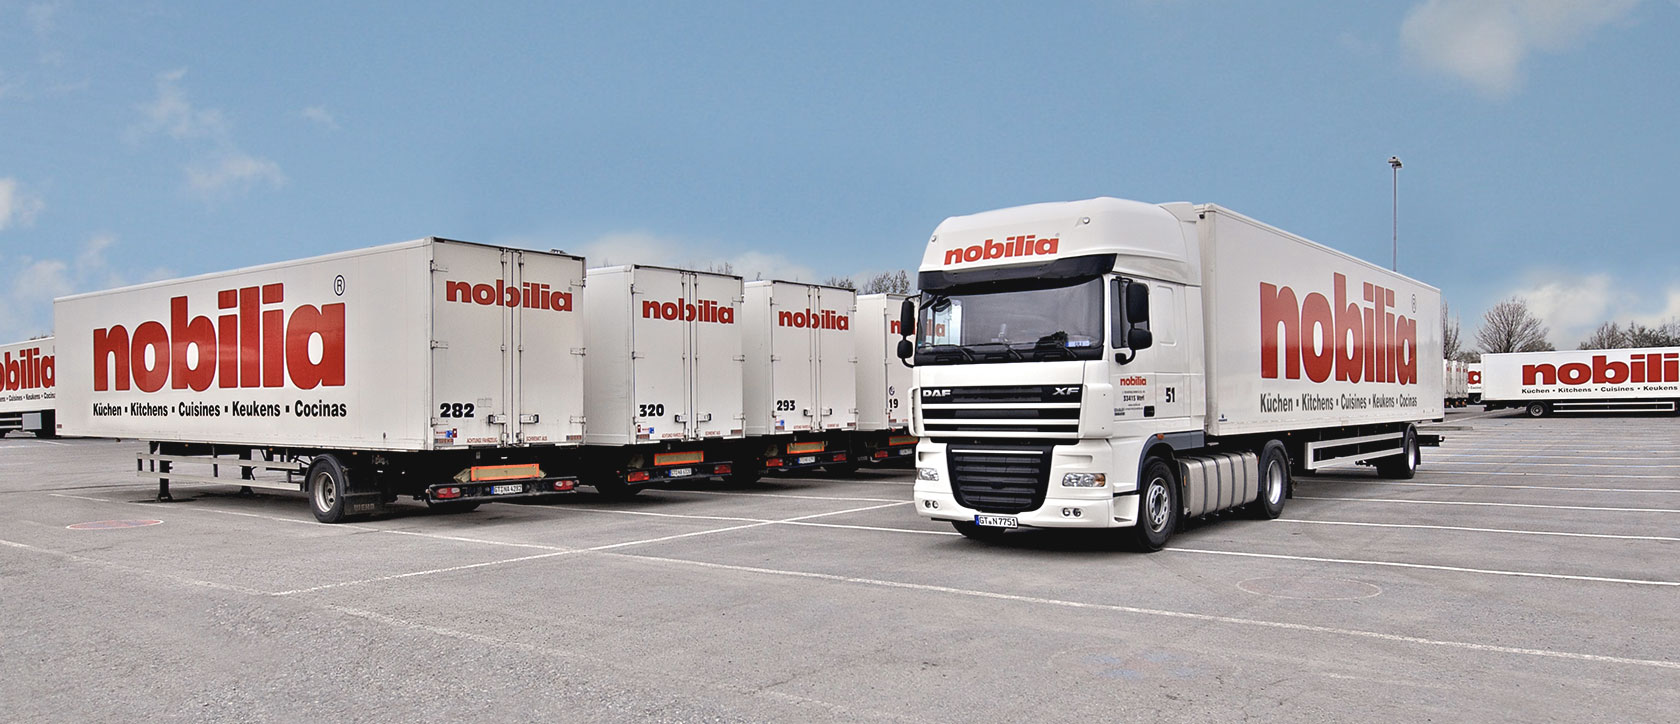 nobilia lorries and tractor-trailers in the nobilia parking area